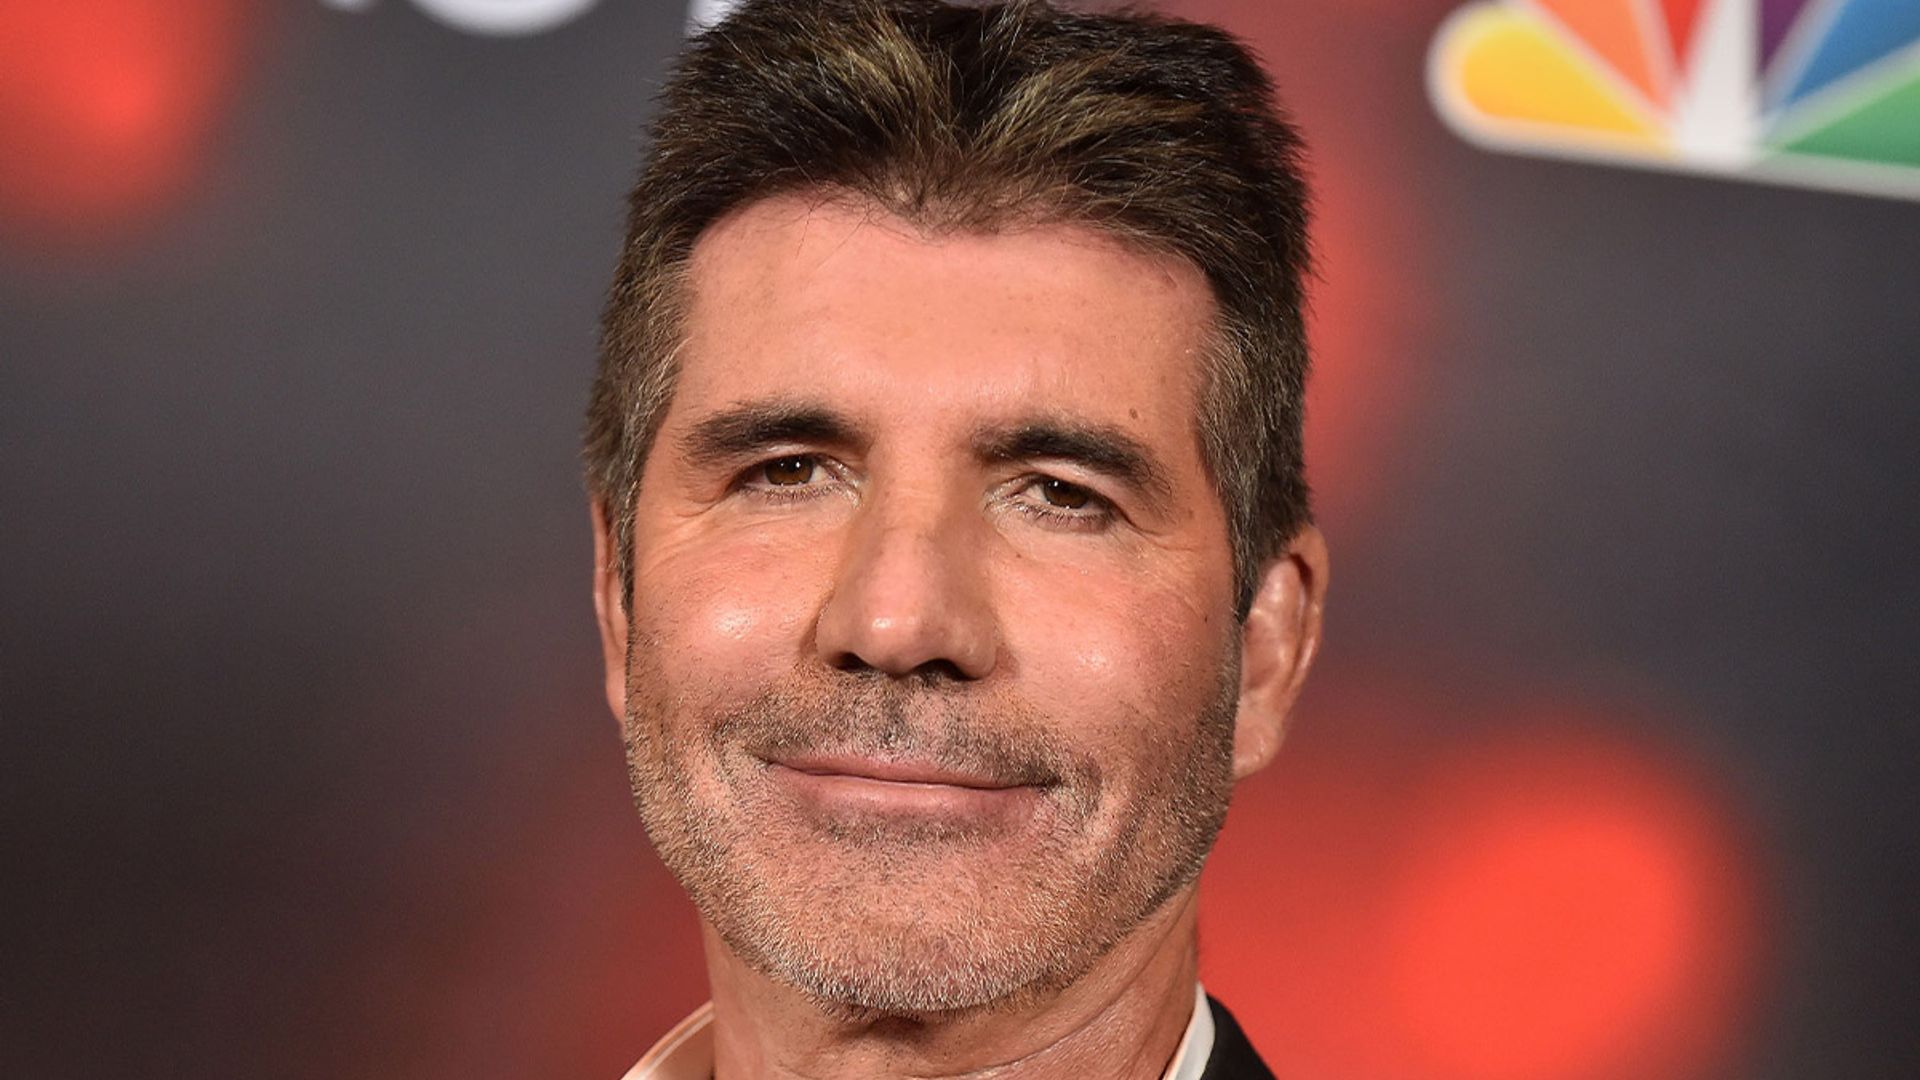 Why Simon Cowell's grand London home with fiancée and son is rarely pictured